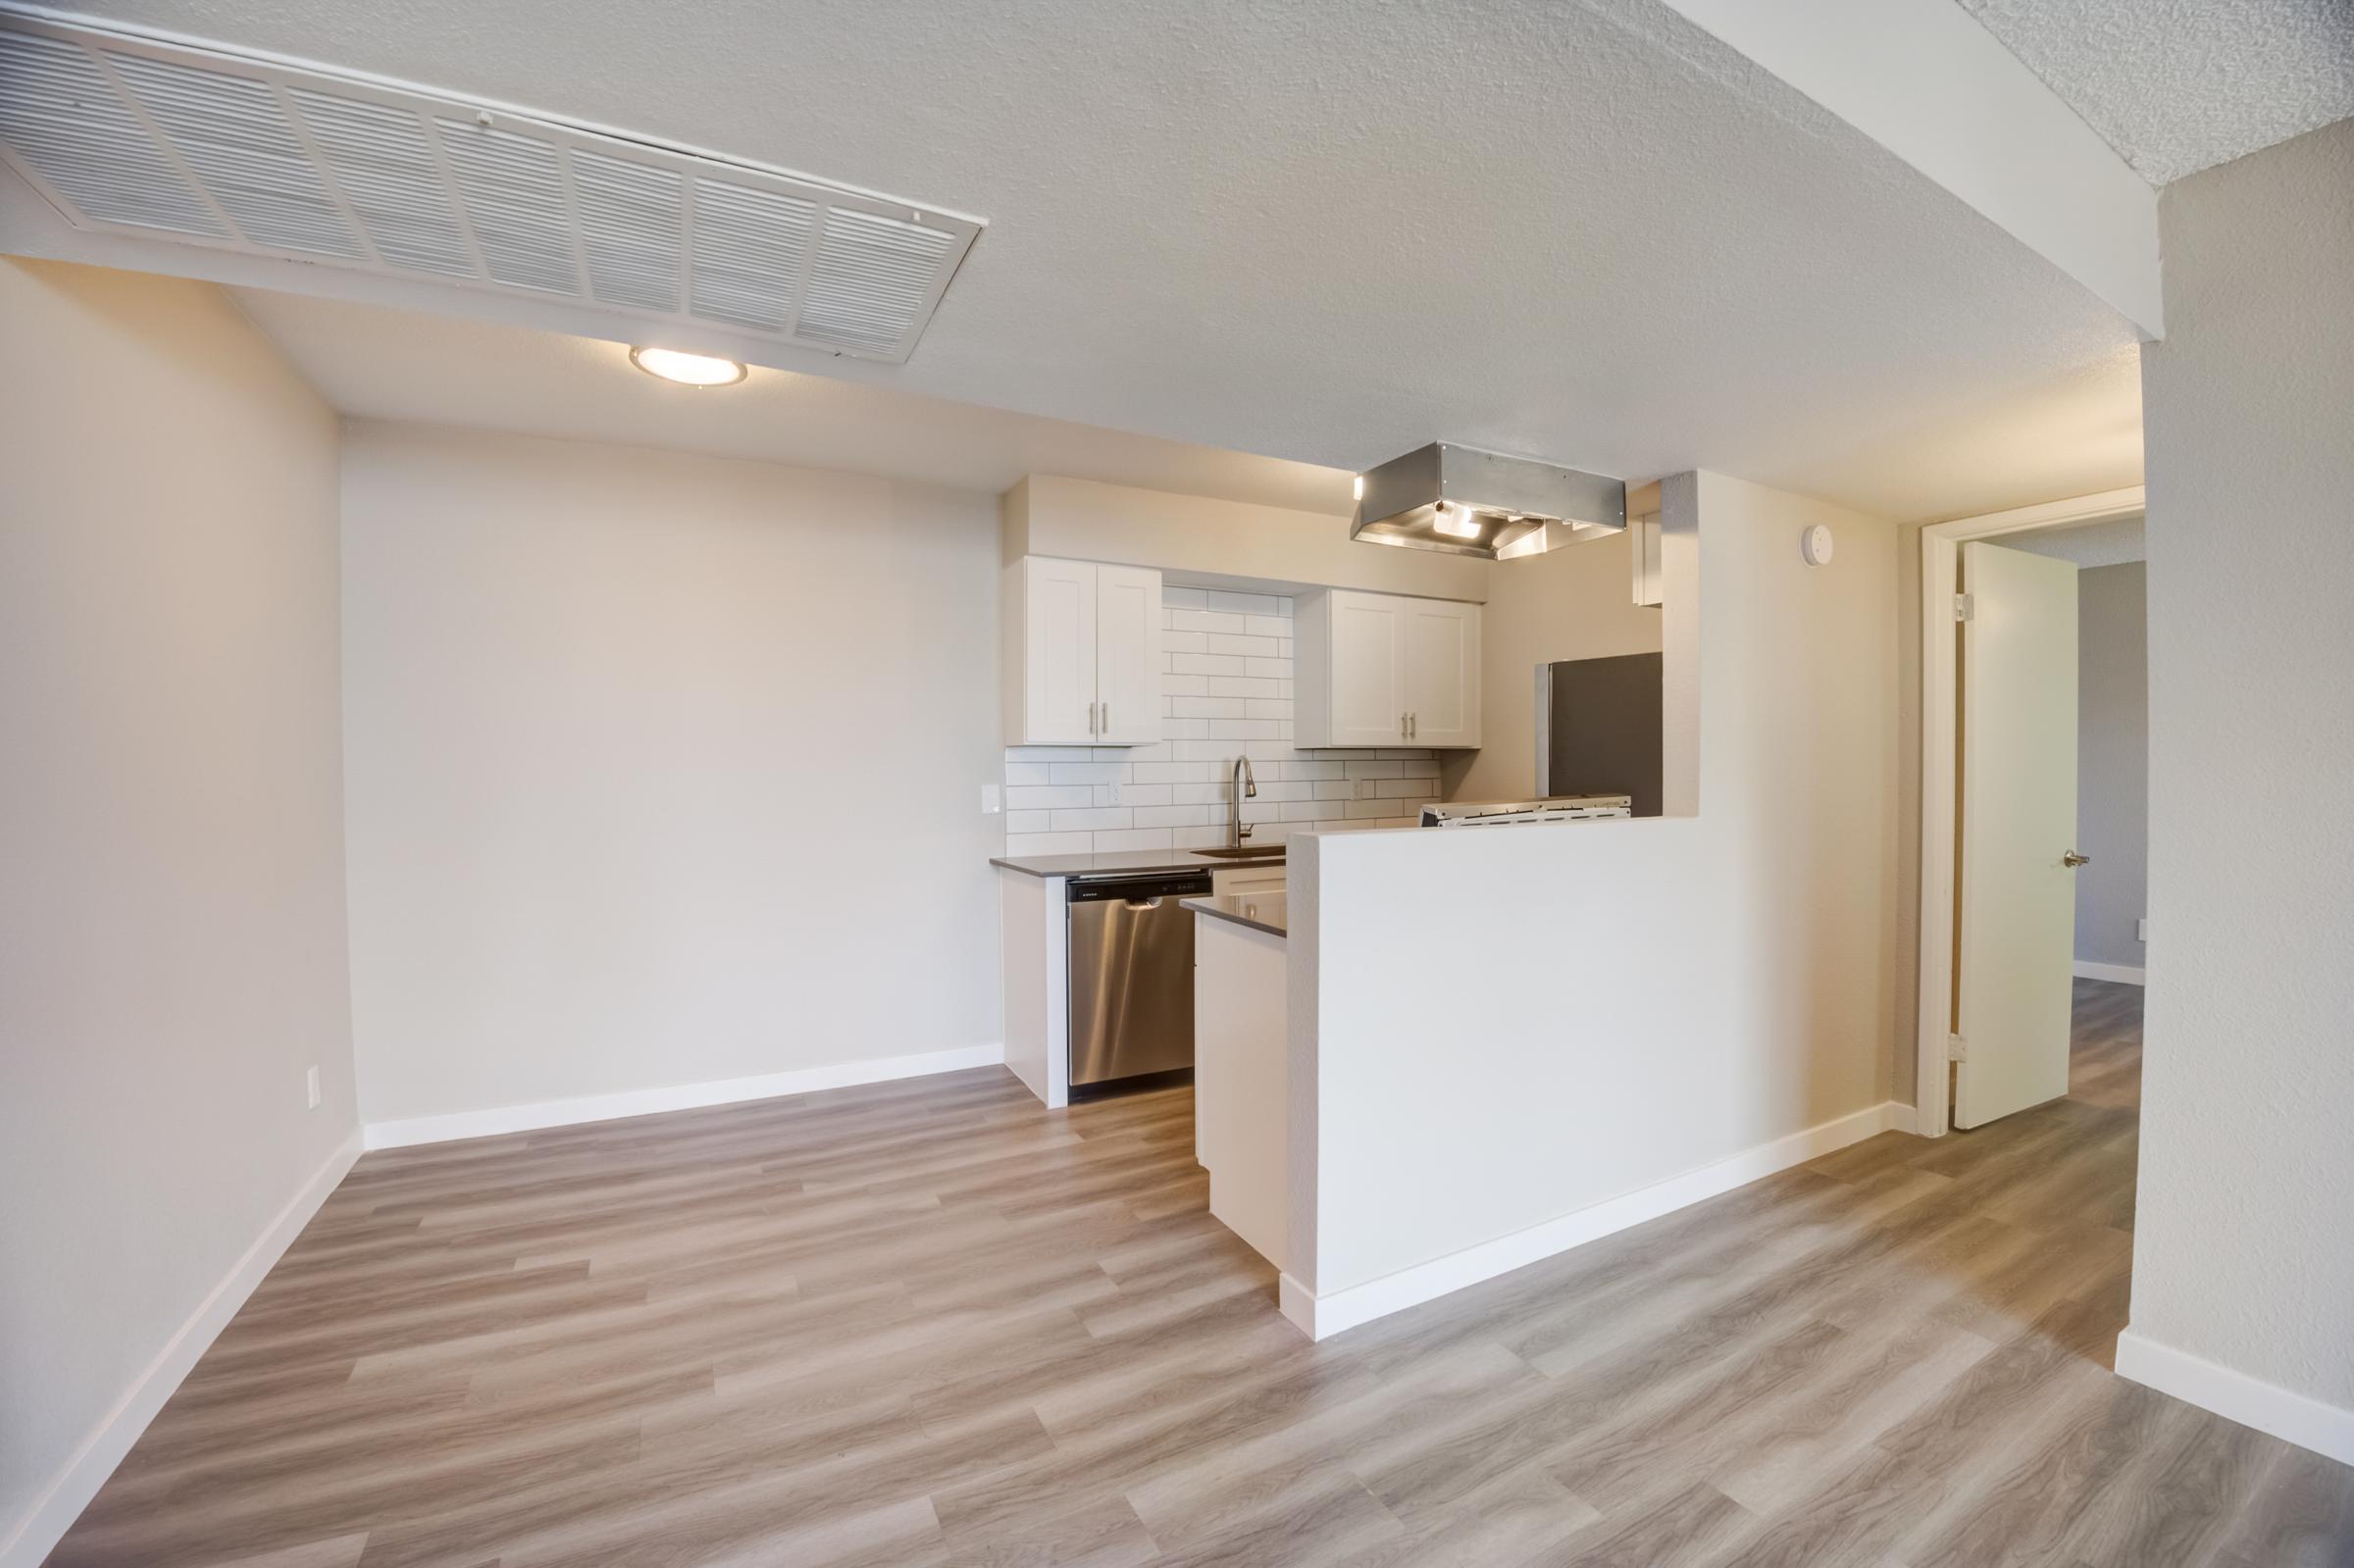 An open concept apartment with a dining area and a kitchen at Rise at the Meadows.